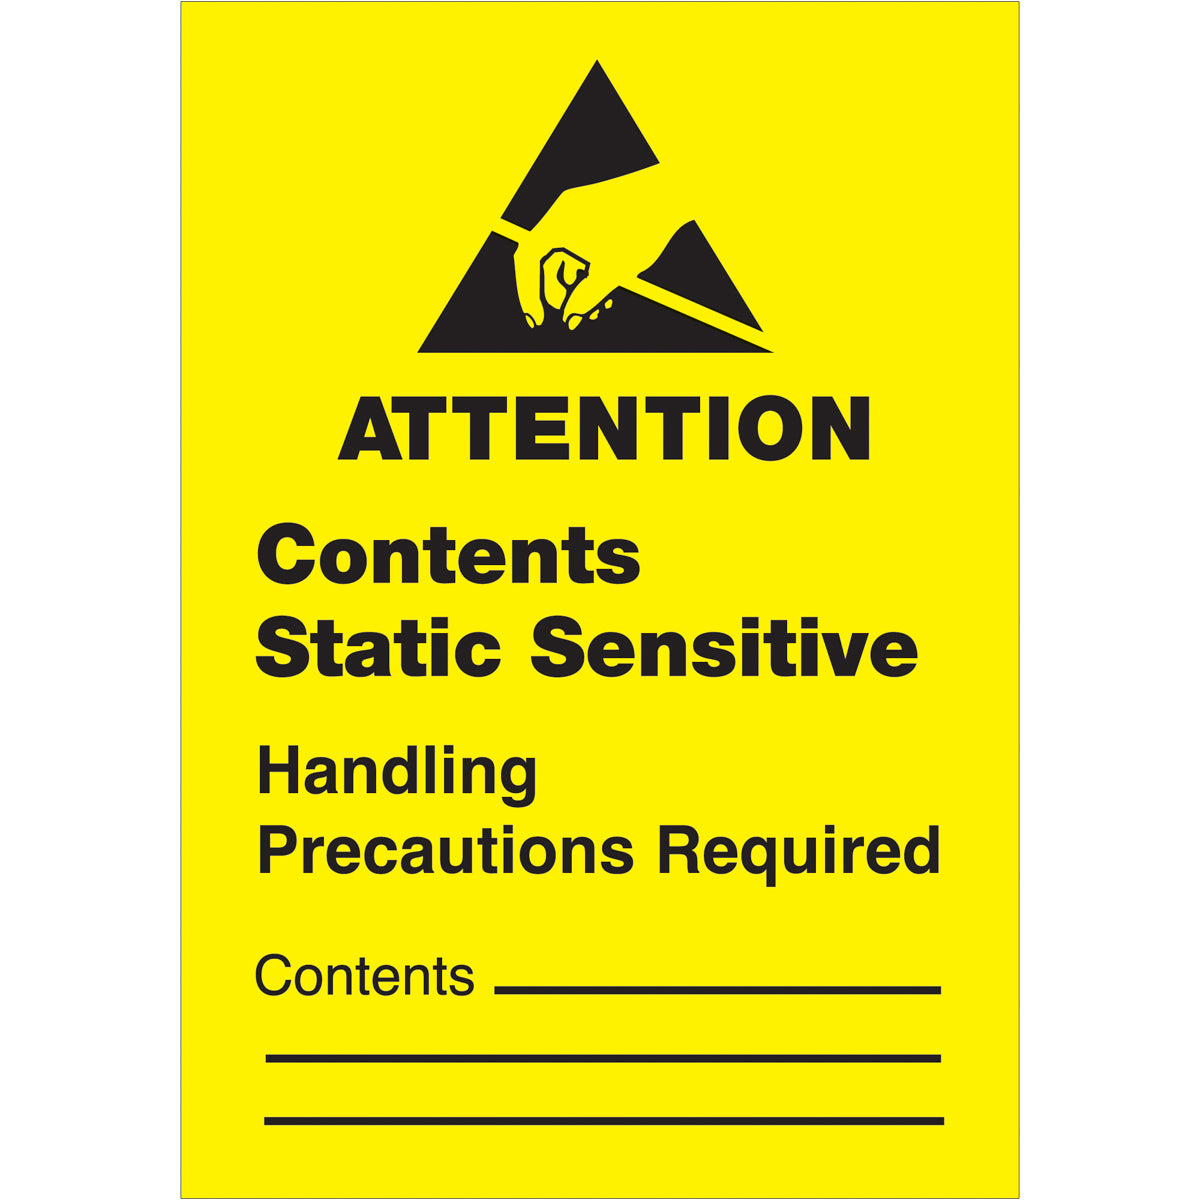 Attention required. Наклейка attention static. Attention contents static sensitive. Antistatic static sensitive. Caution electrostatic sensitive devices.